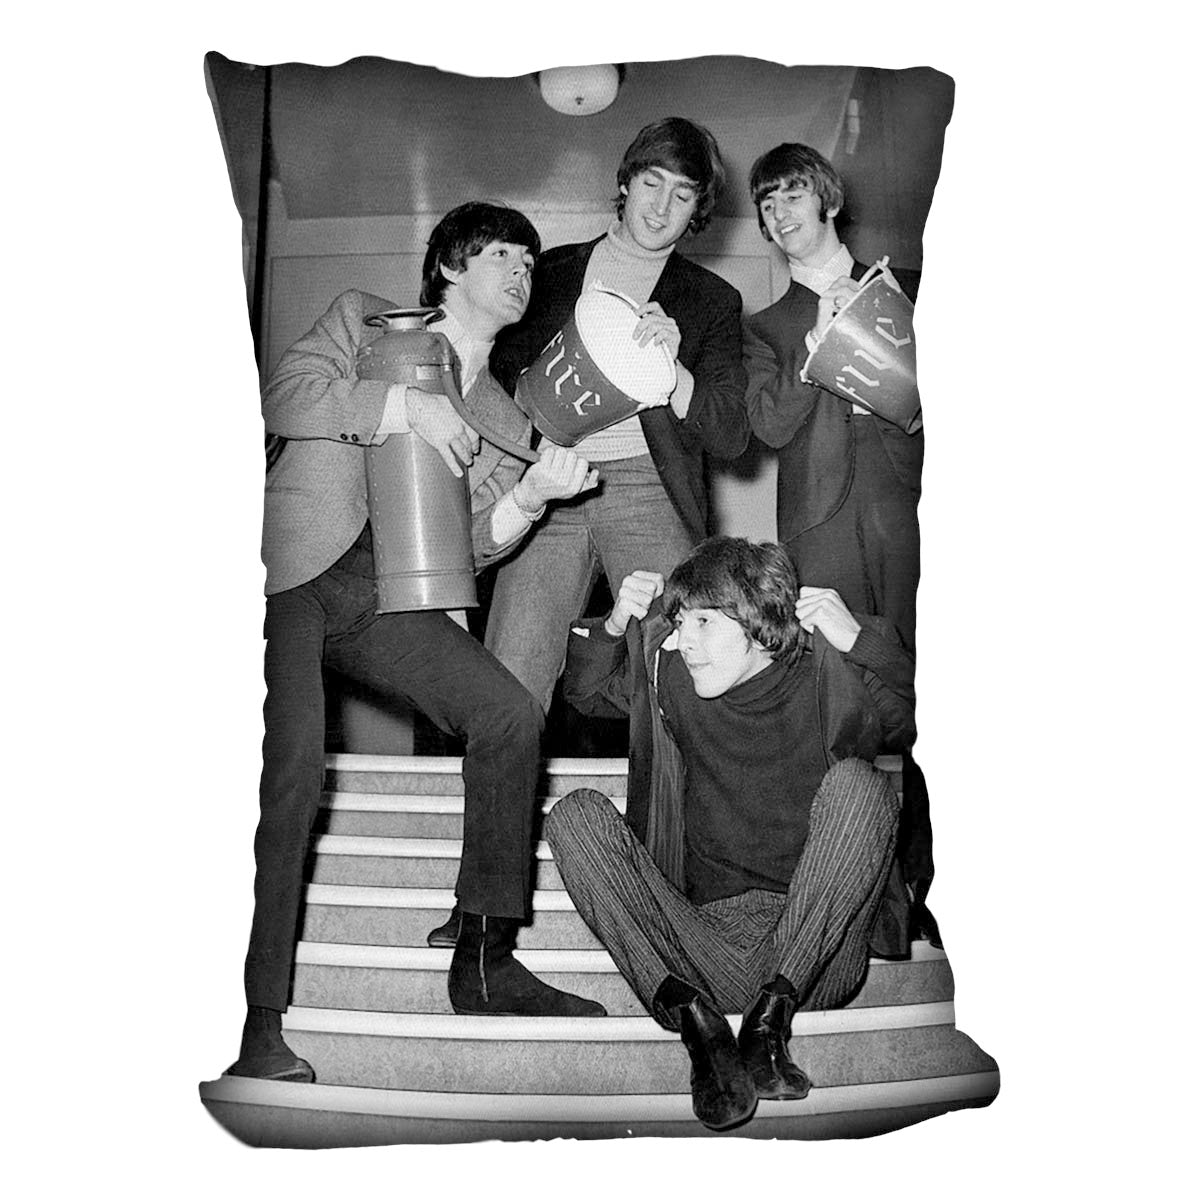 The Beatles backstage at the Liverpool Empire Cushion